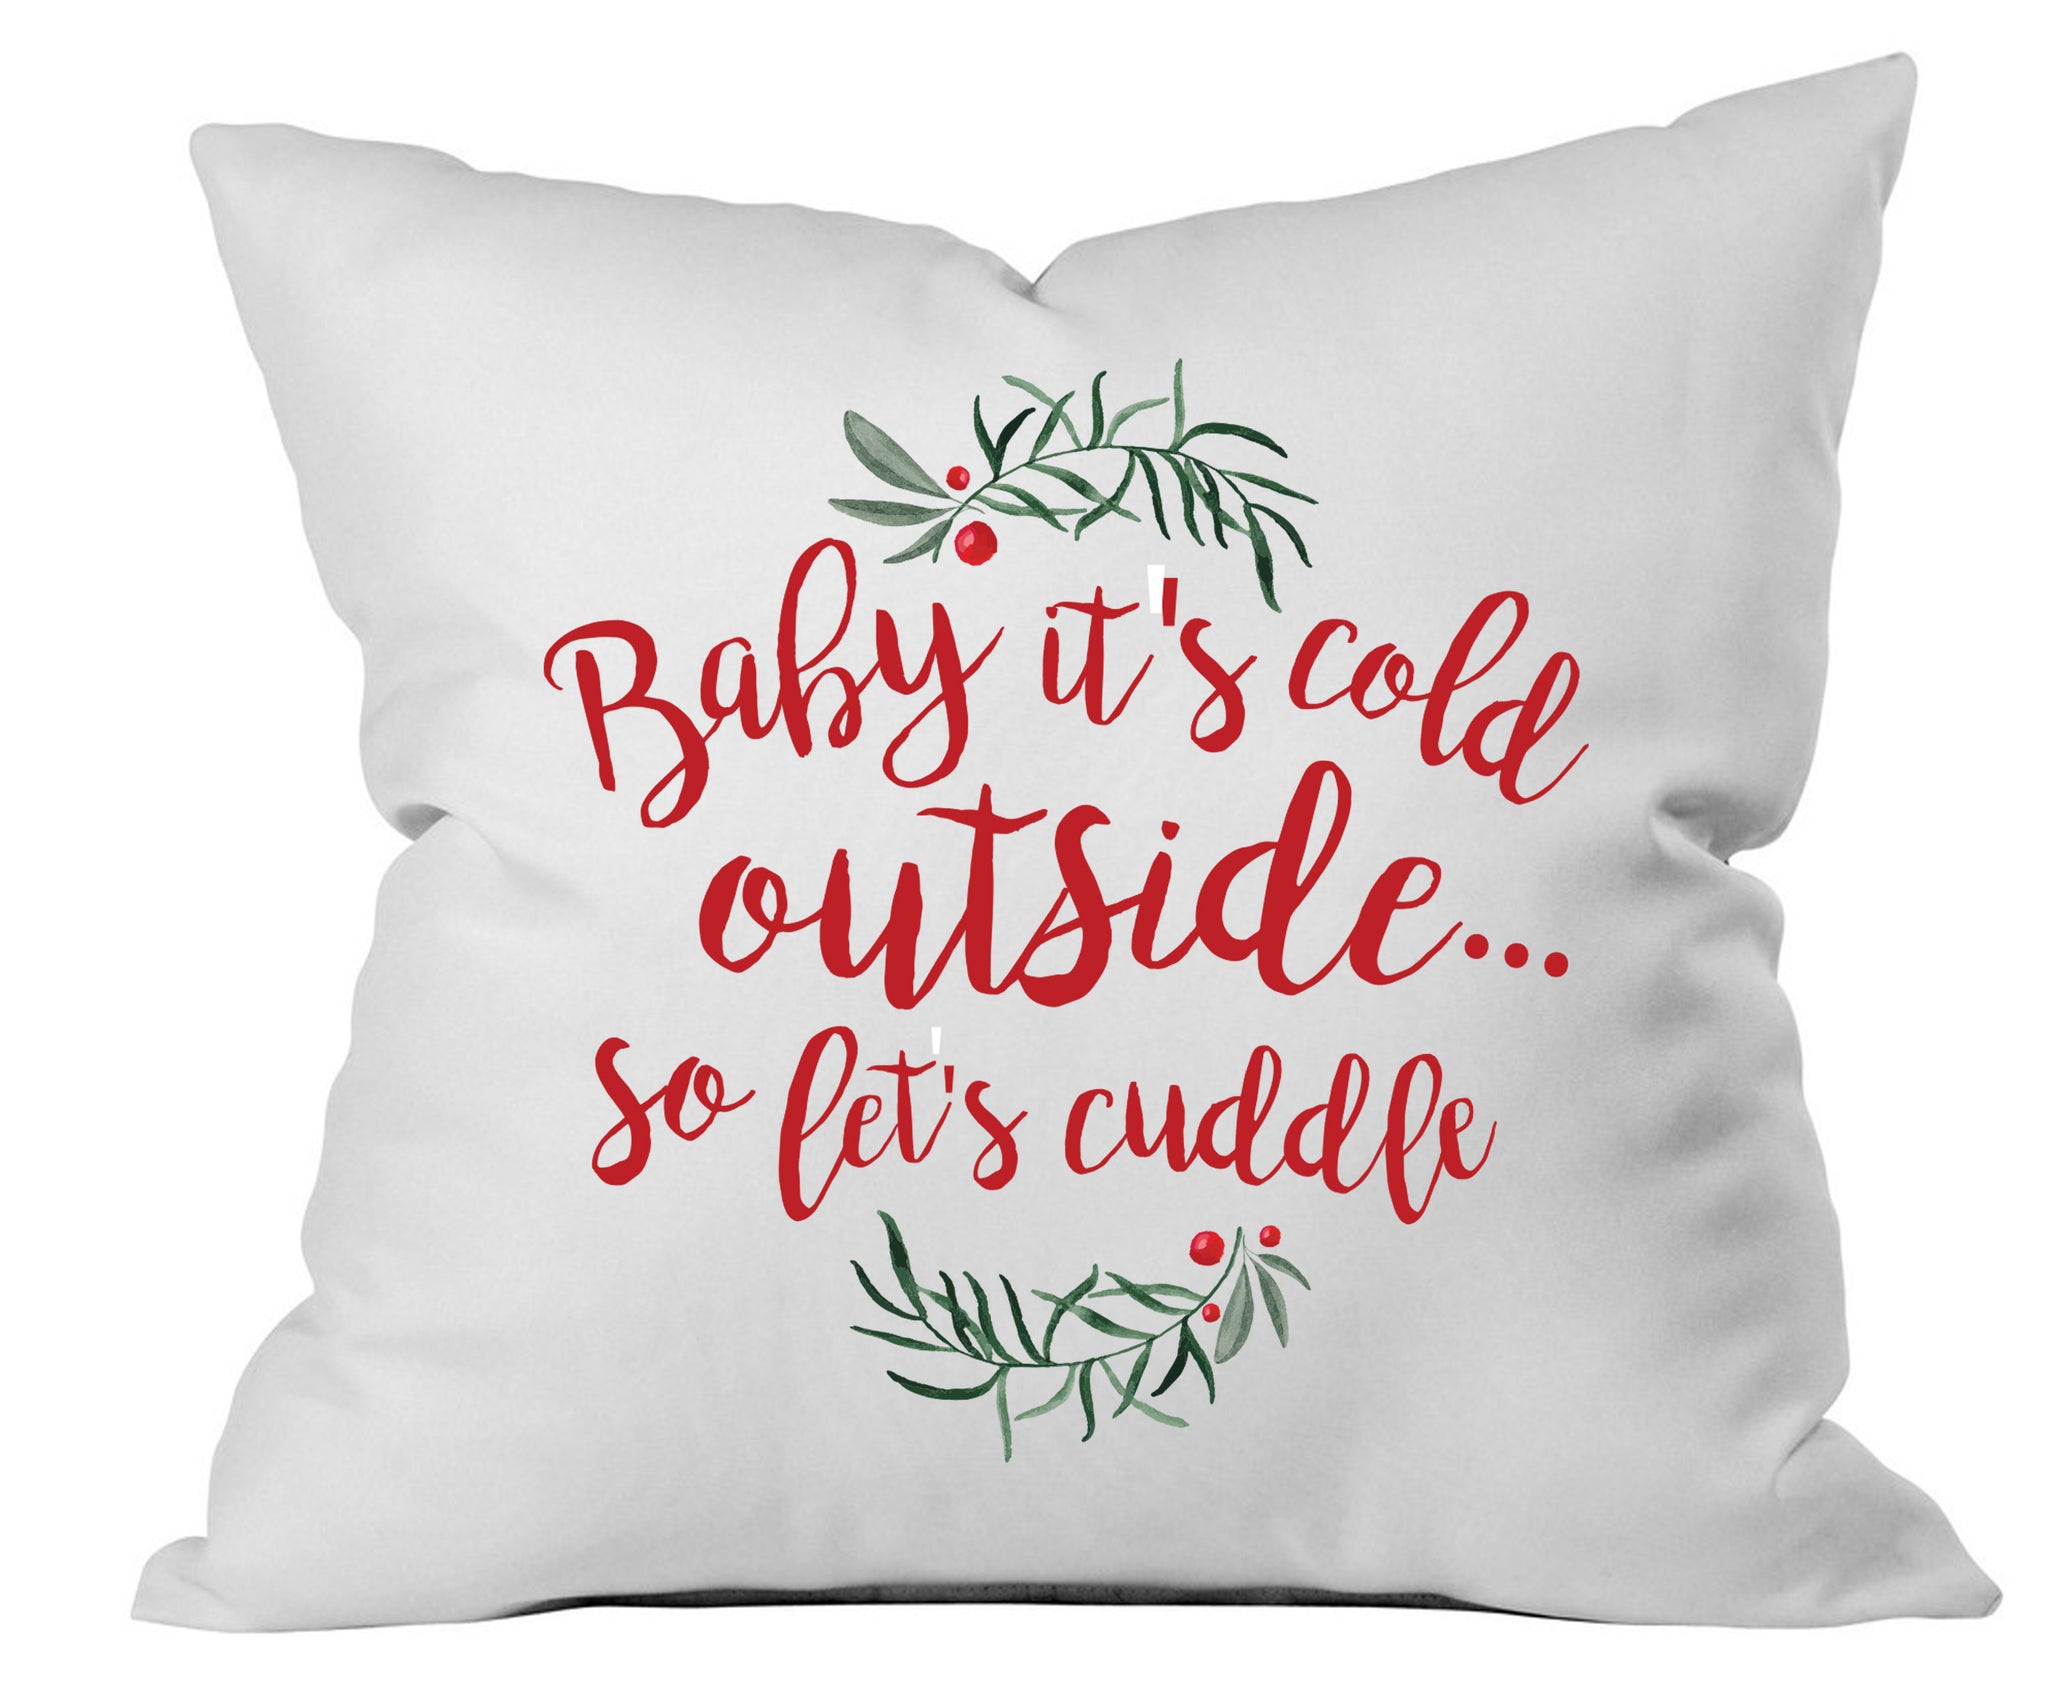 Baby Its Cold Outside So Let's Cuddle 18x18" Throw Pillow Cover - Christmas Pillow Cover - Couples Gifts Ready Packaging